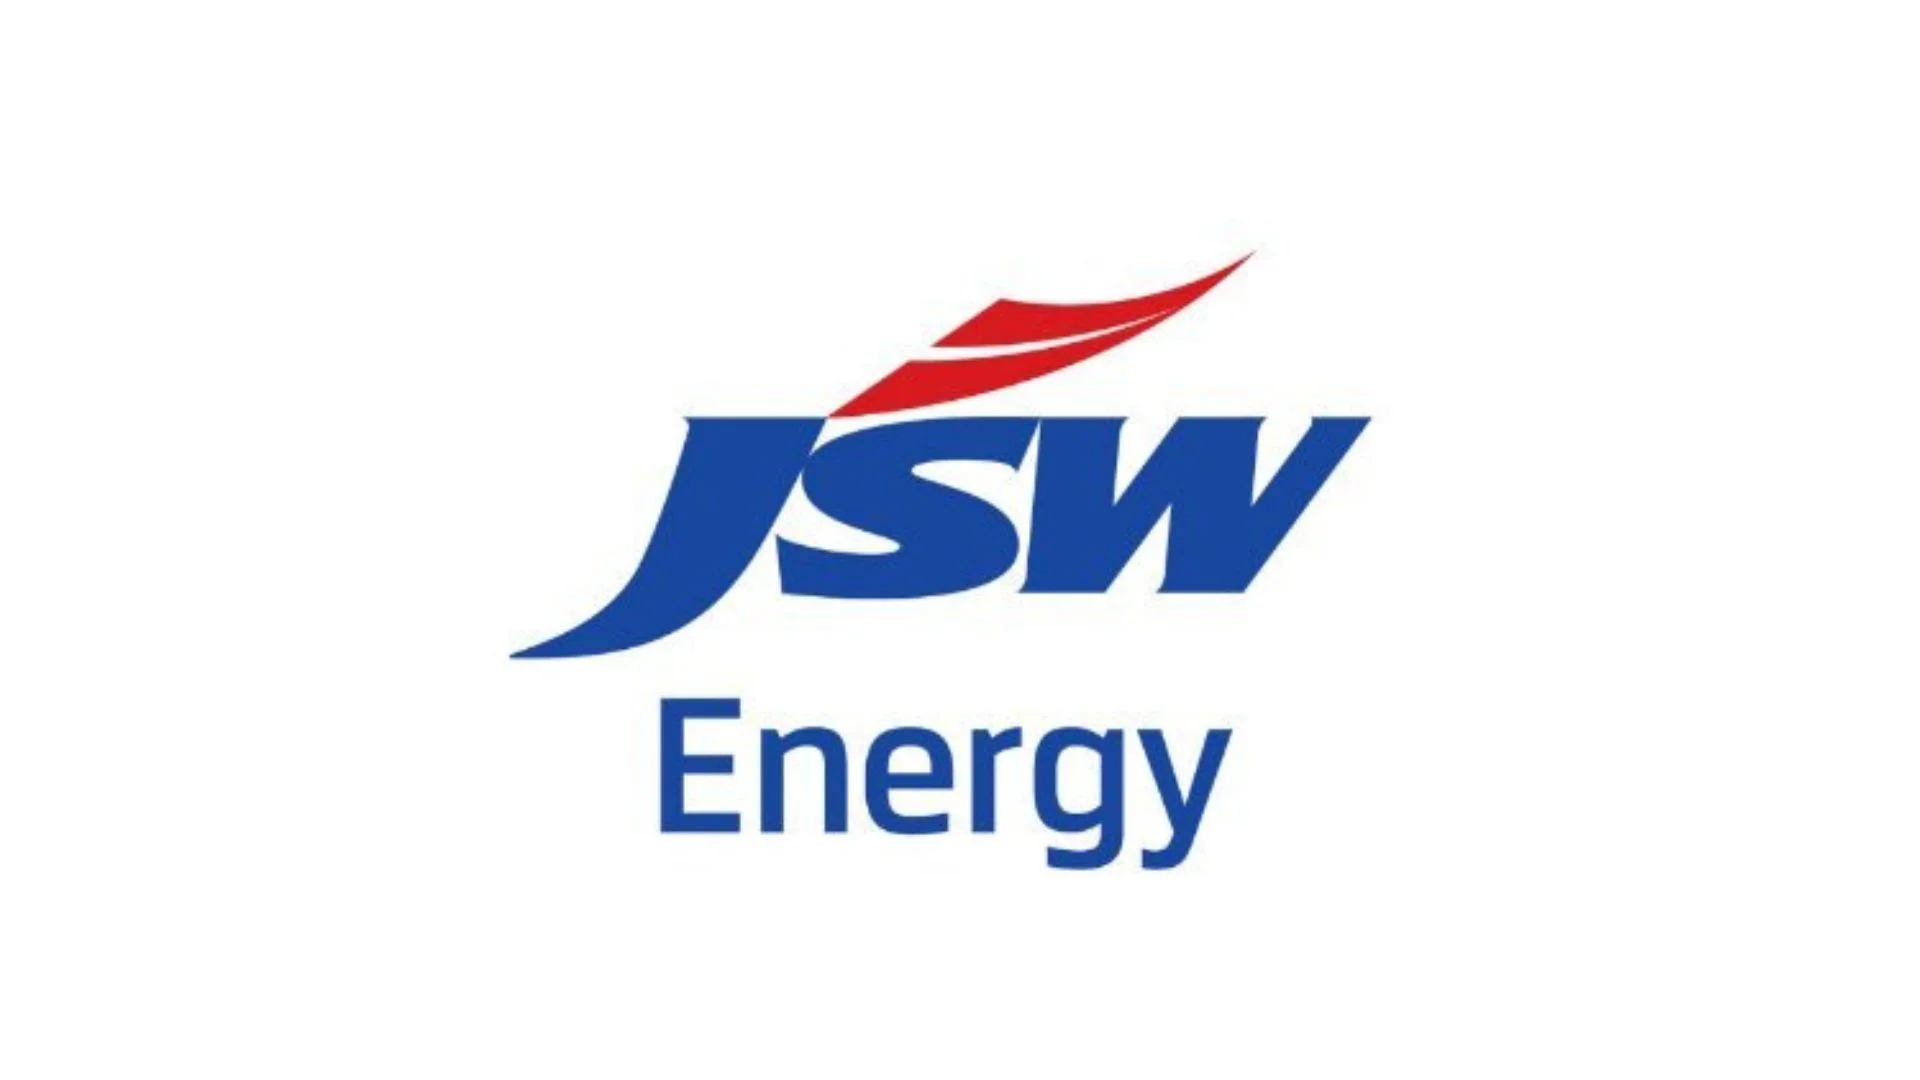 JSW Energy raises $65 million from institutional investors, including Abu Dhabi Investment Authority